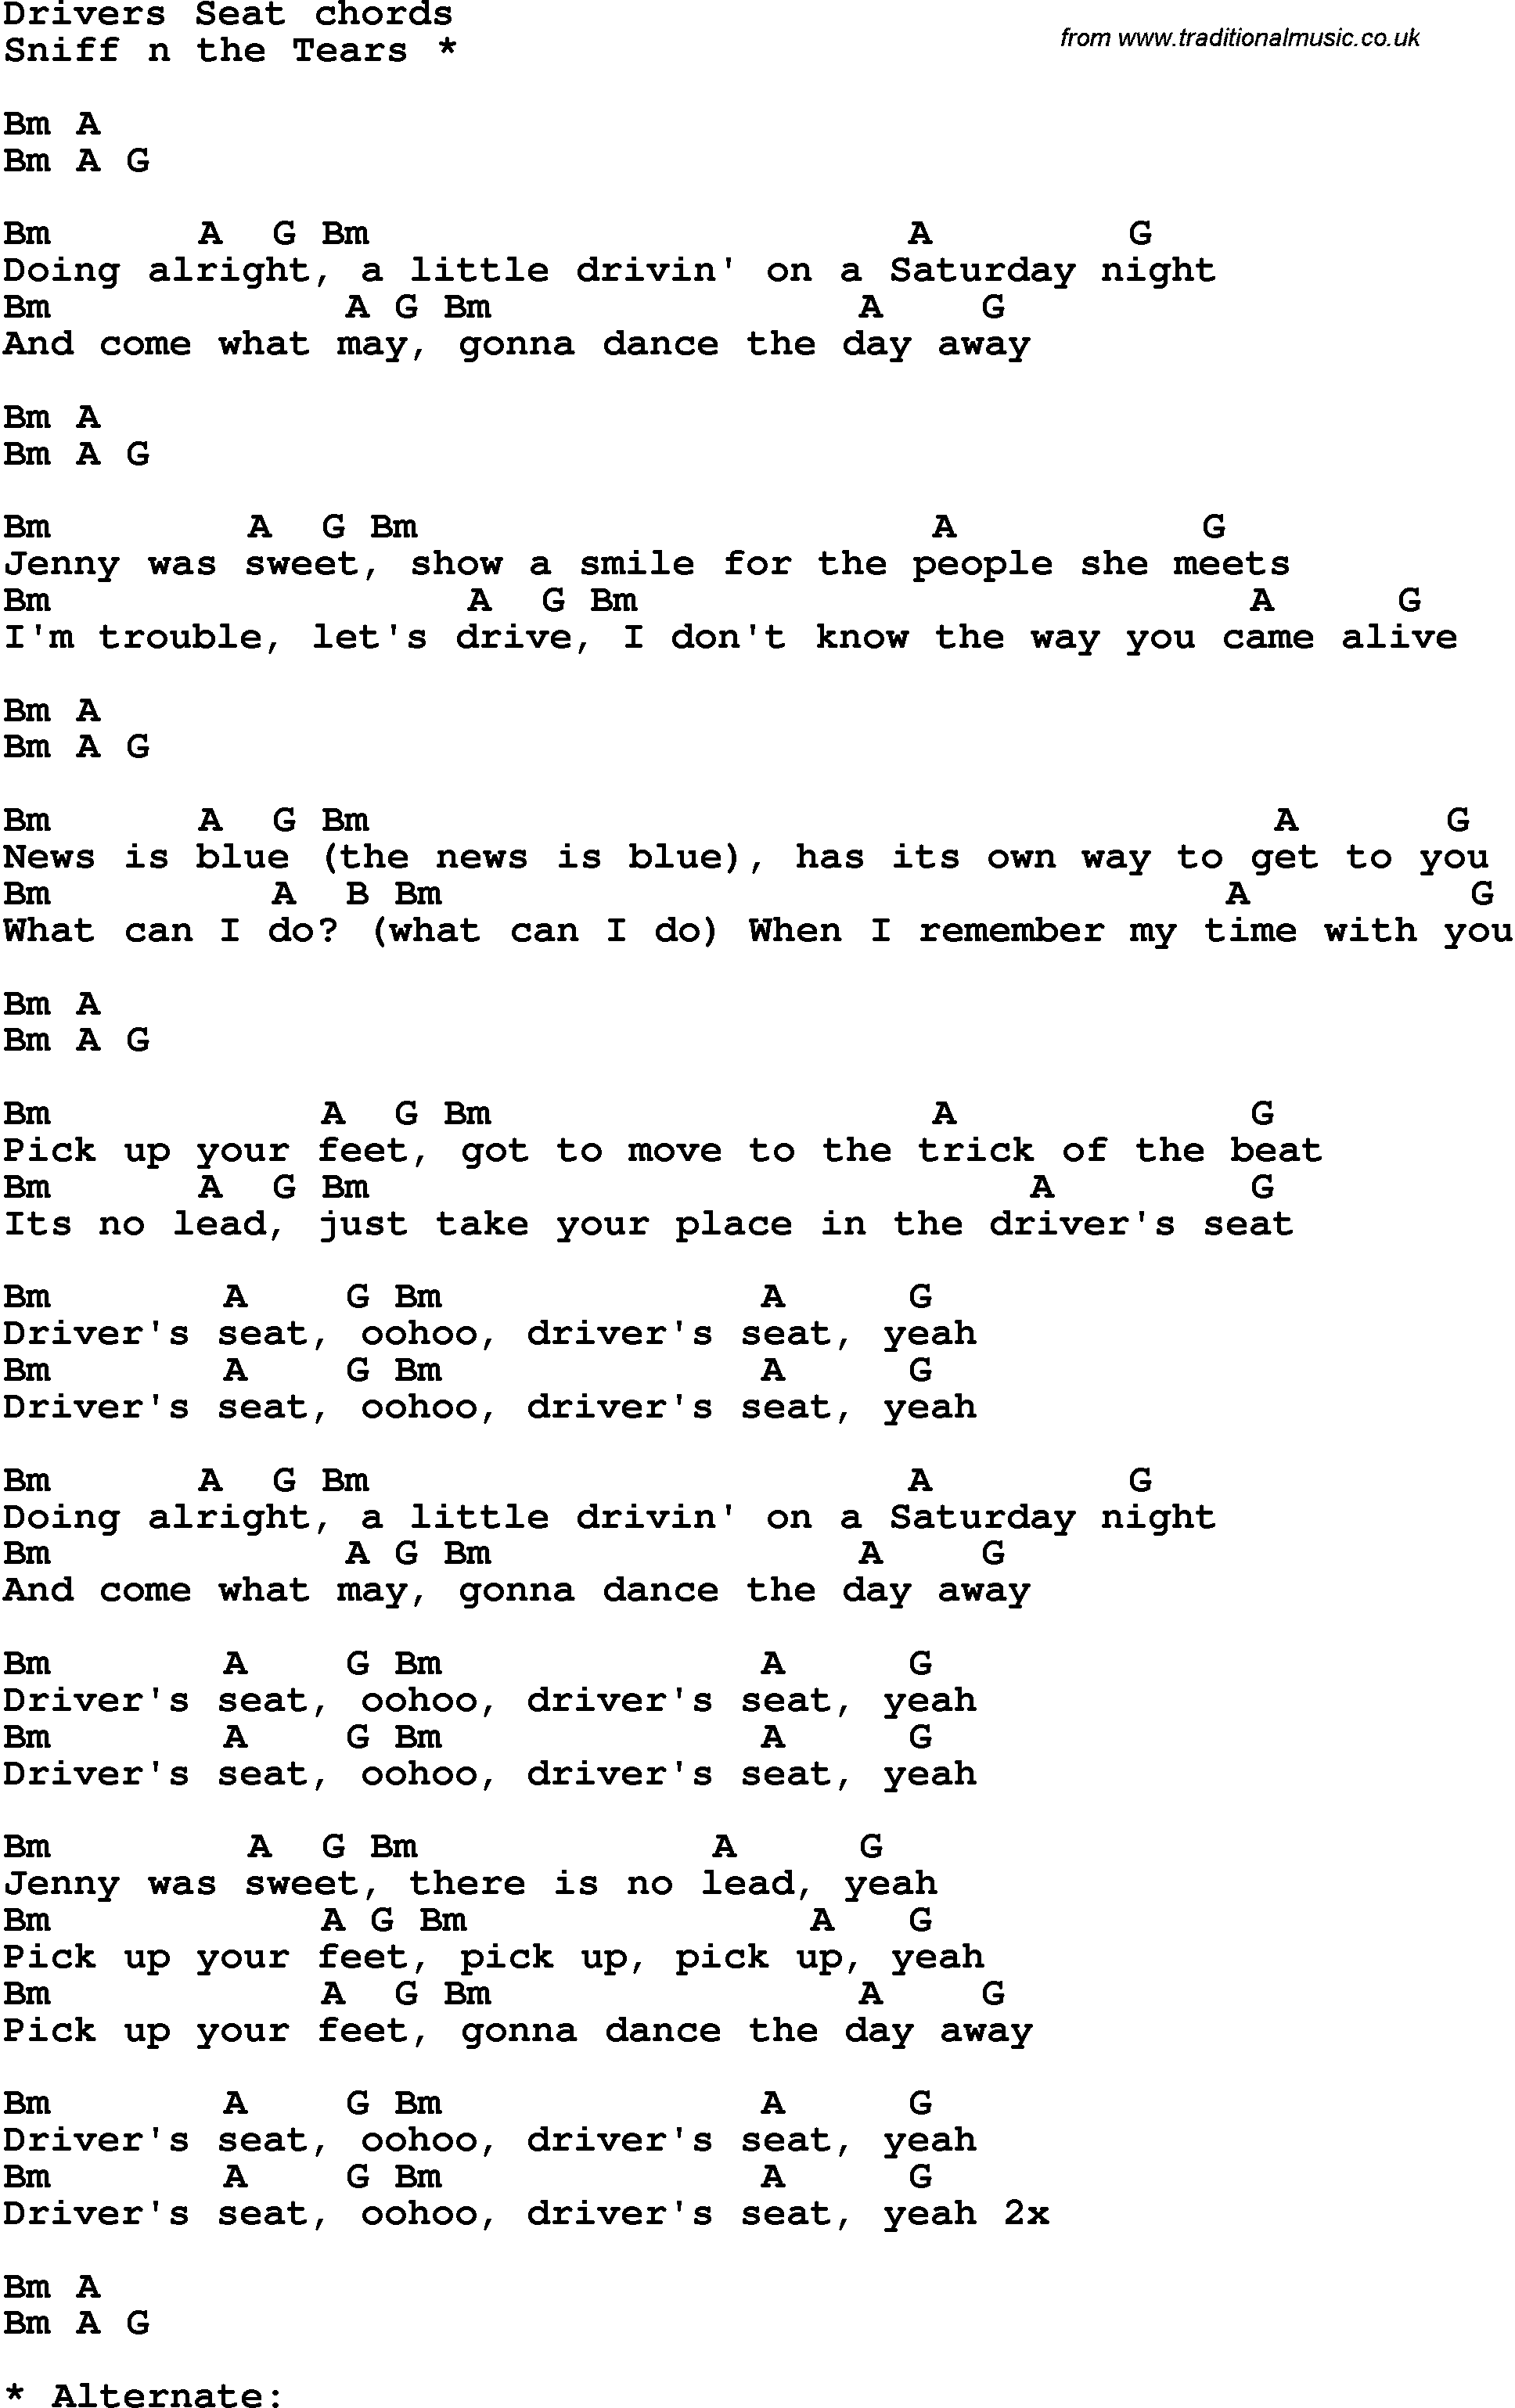 Song Lyrics with guitar chords for Driver's Seat